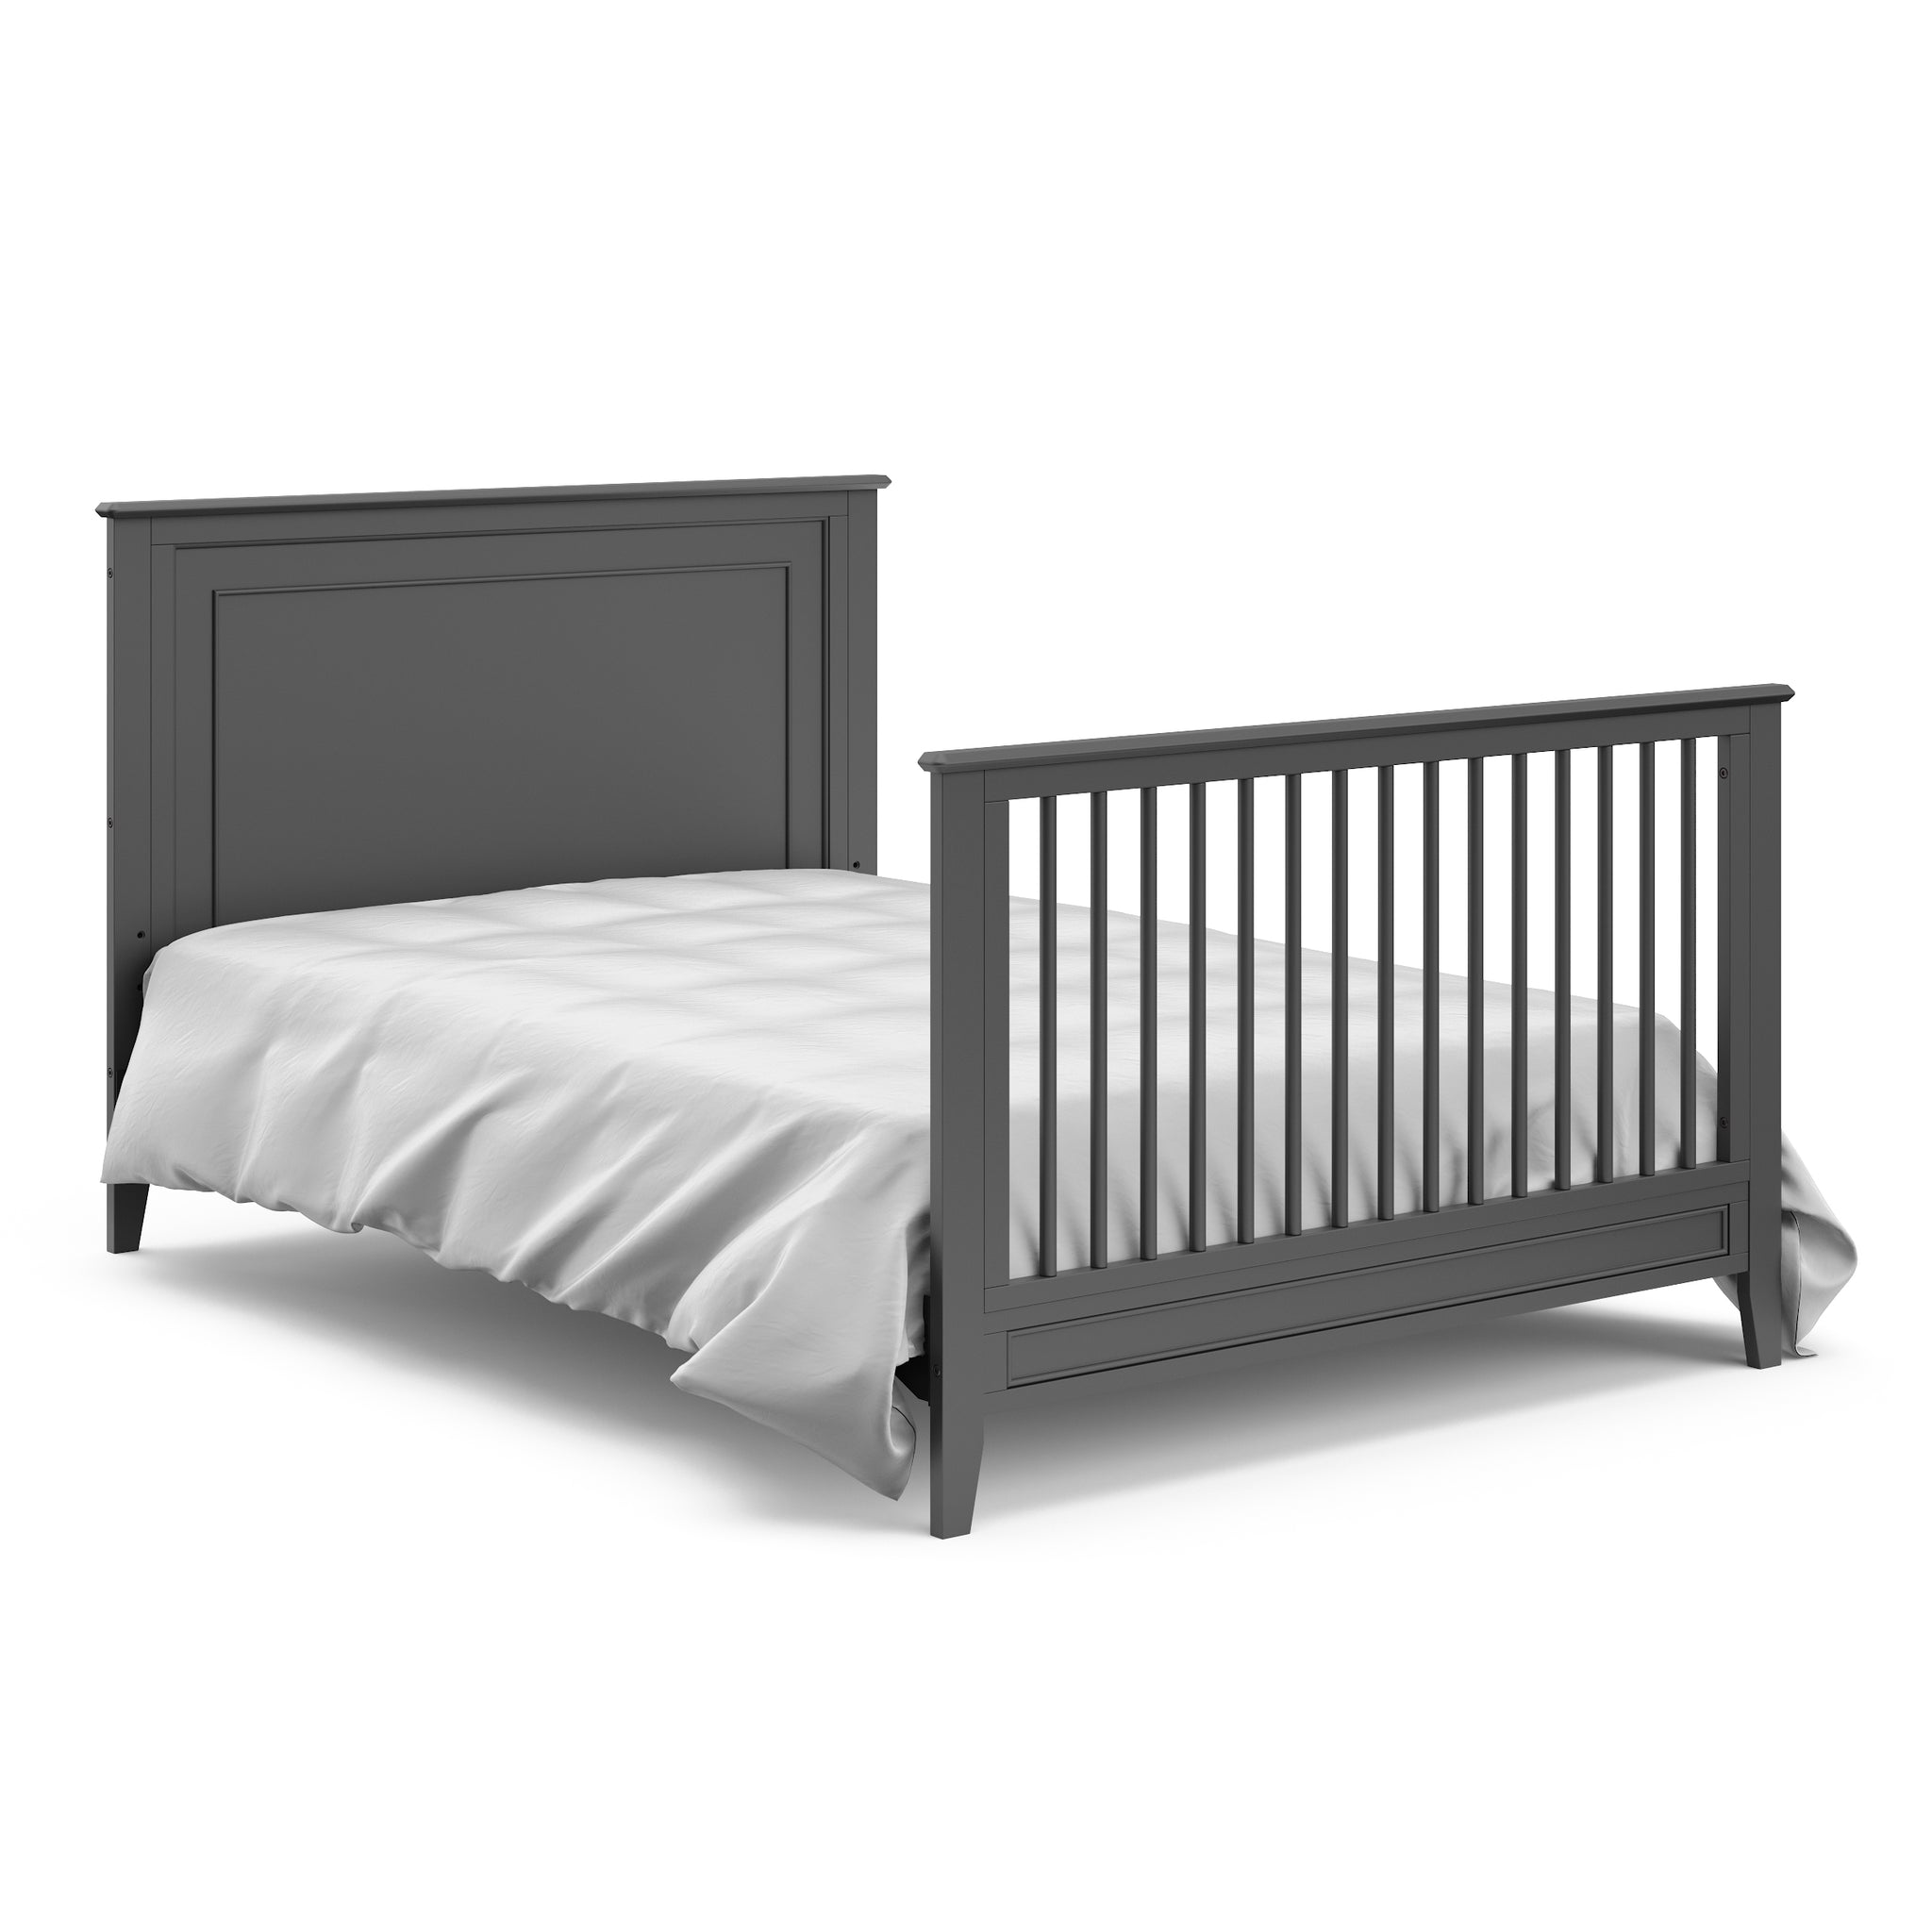 gray crib in full-size bed with headboard and footboard conversion 